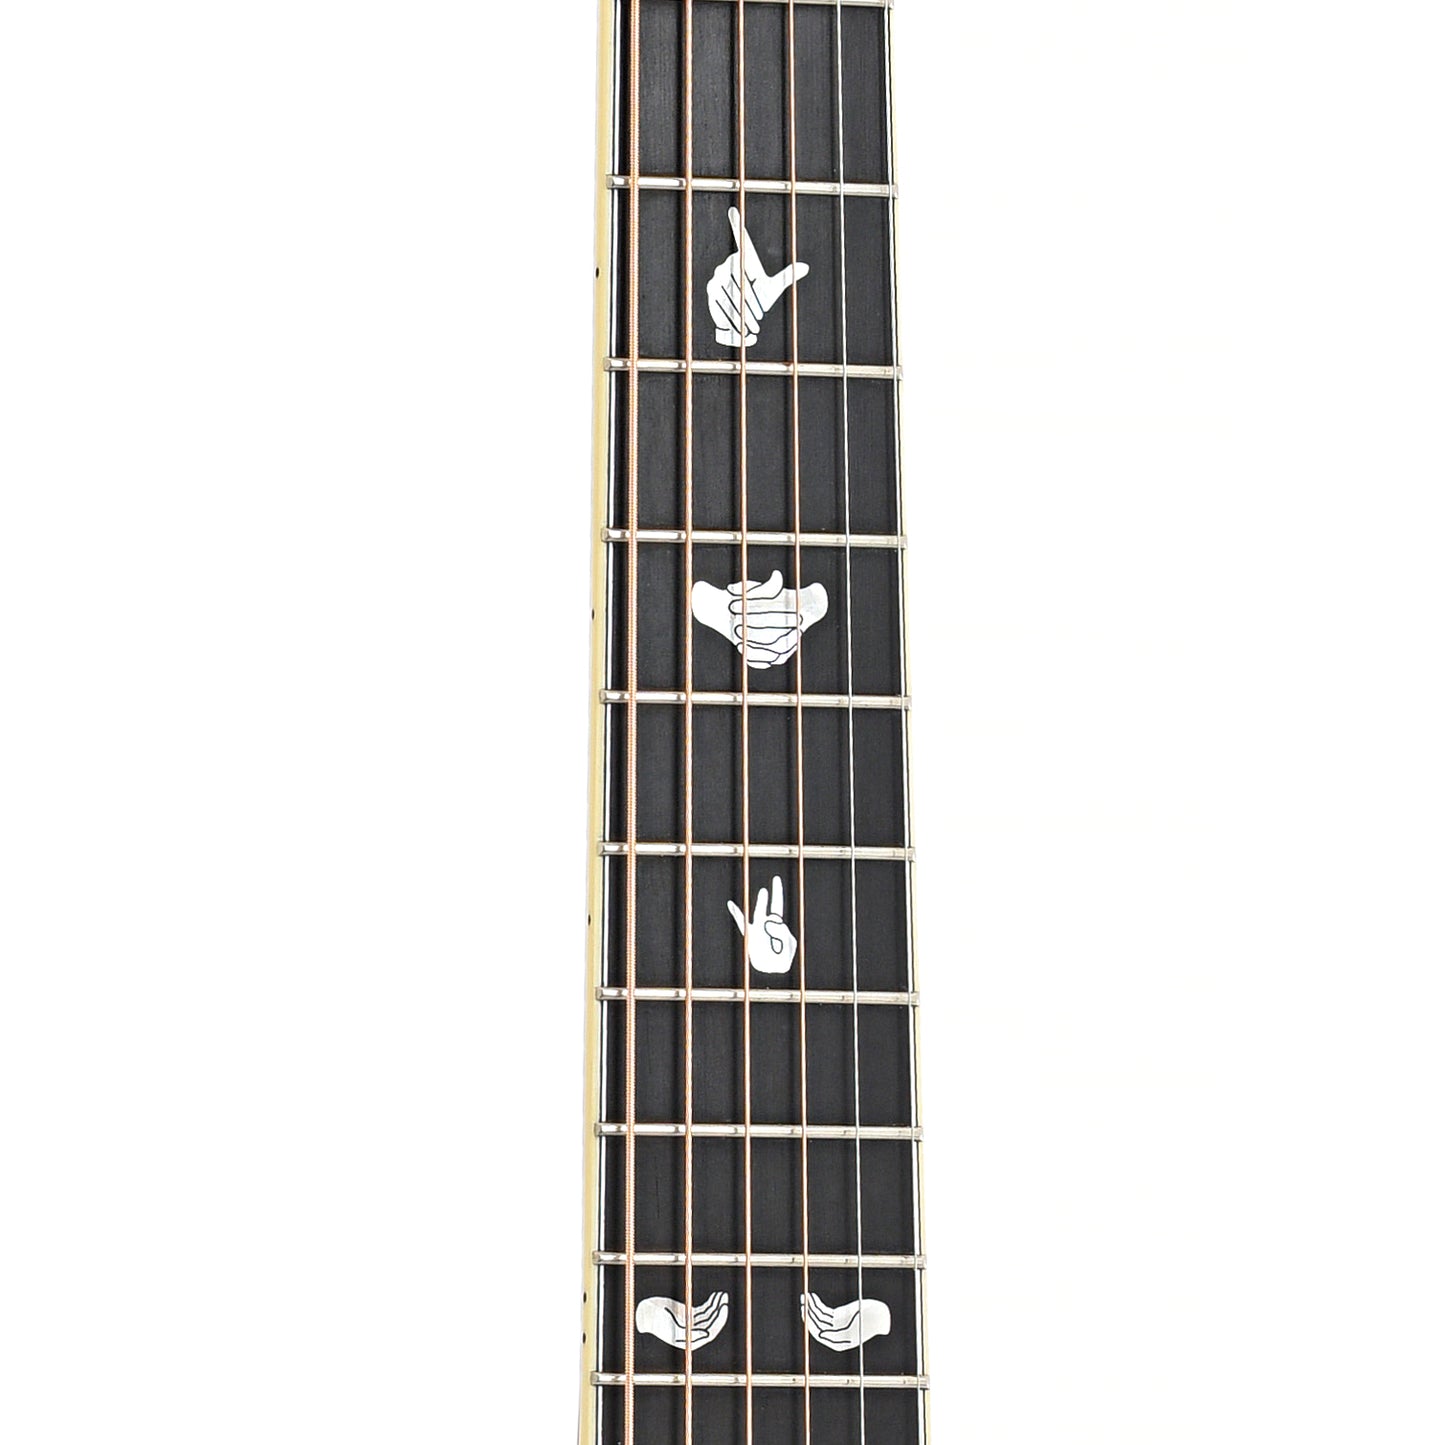 Fretboard of Martin 000C-28 Andy Summers Signature Model Acoustic Guitar (2006)